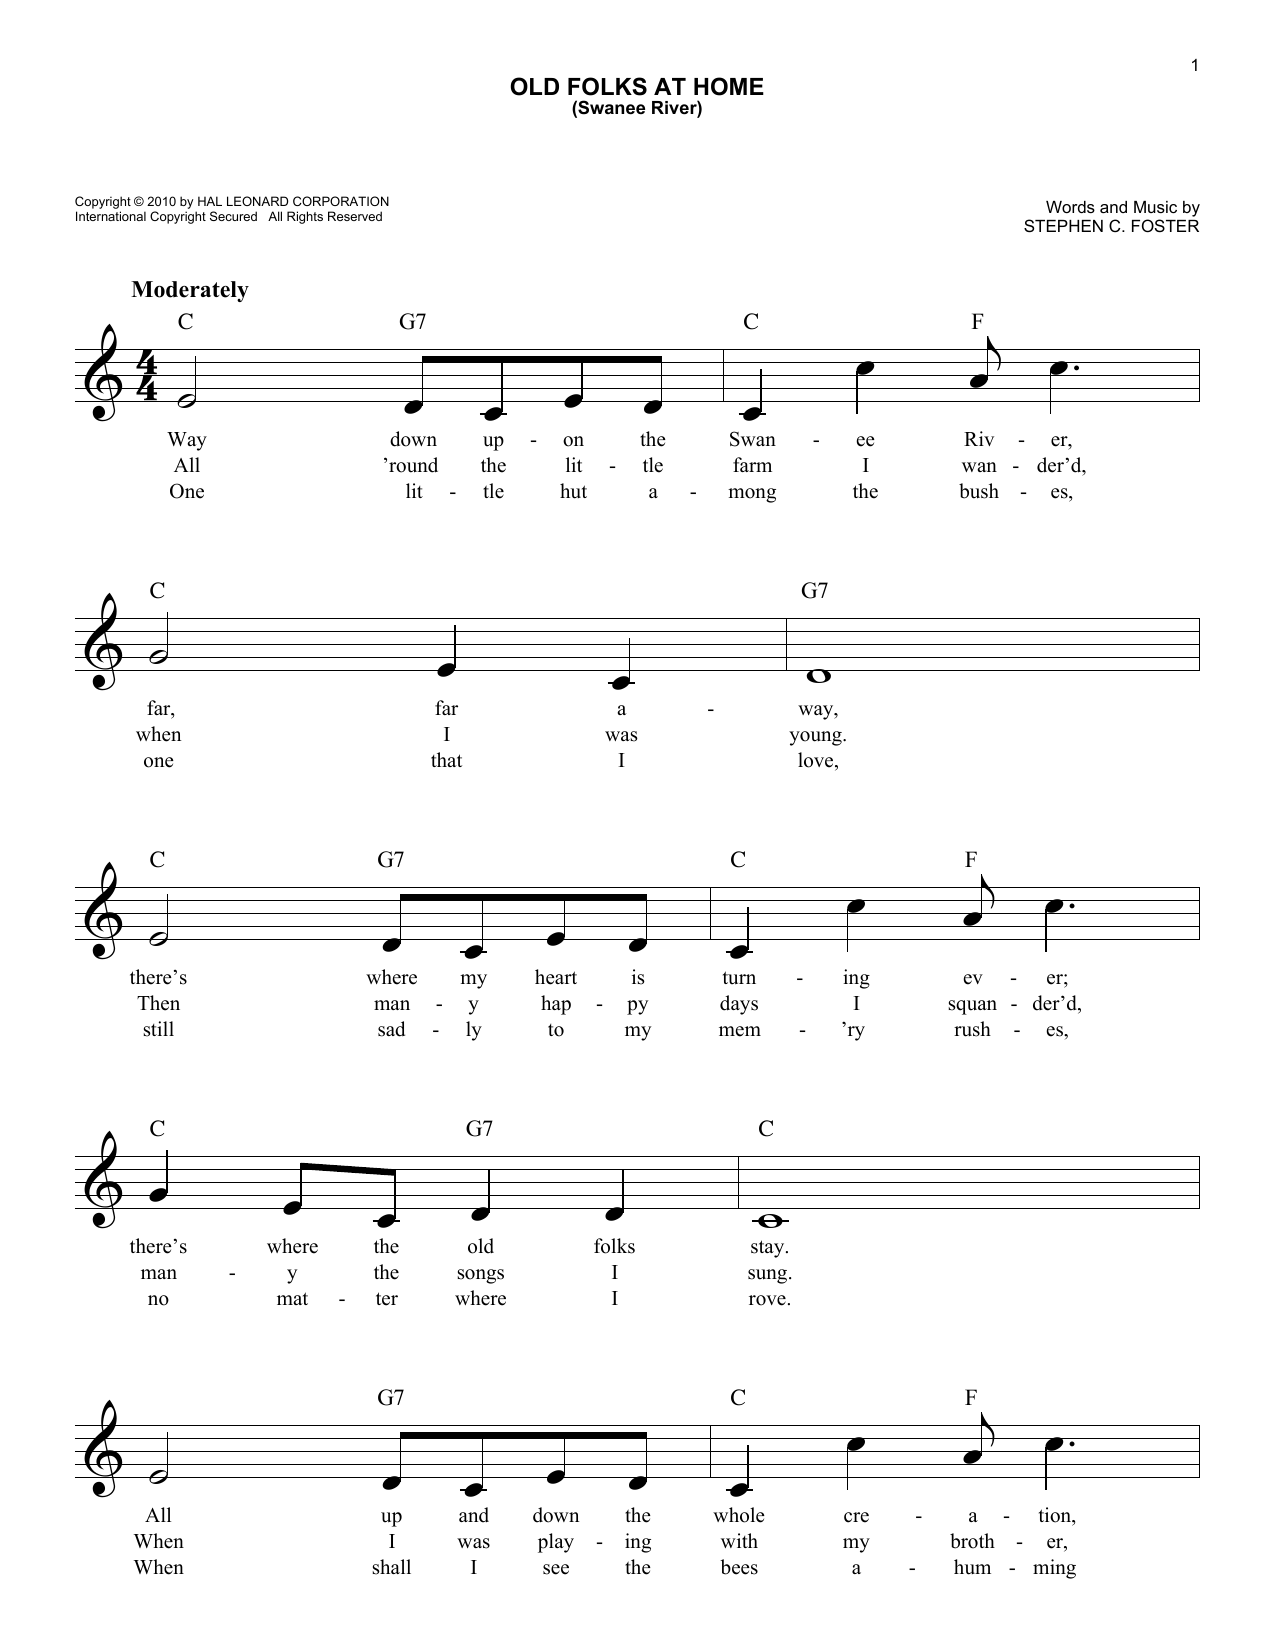 Download Stephen C. Foster Old Folks At Home (Swanee River) Sheet Music